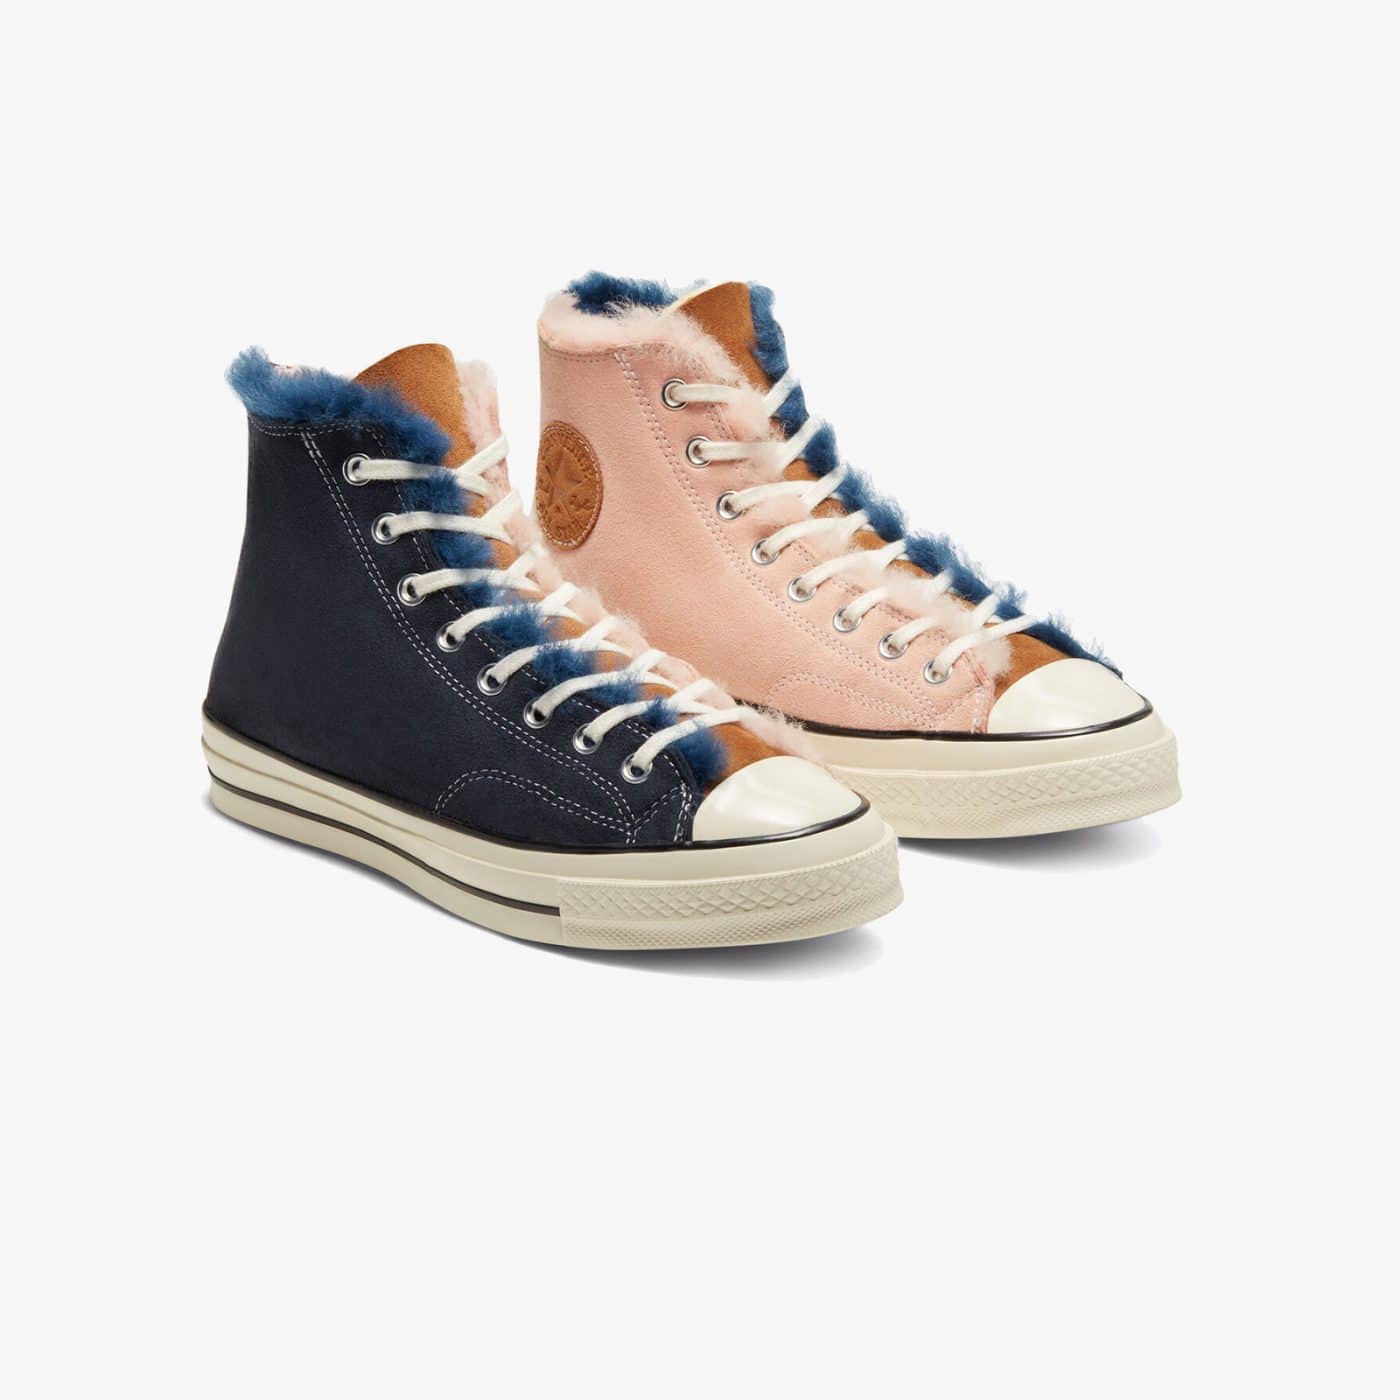 F*#@ the Weather with the New Lambskin-Lined Converse Chuck 70 Hi |